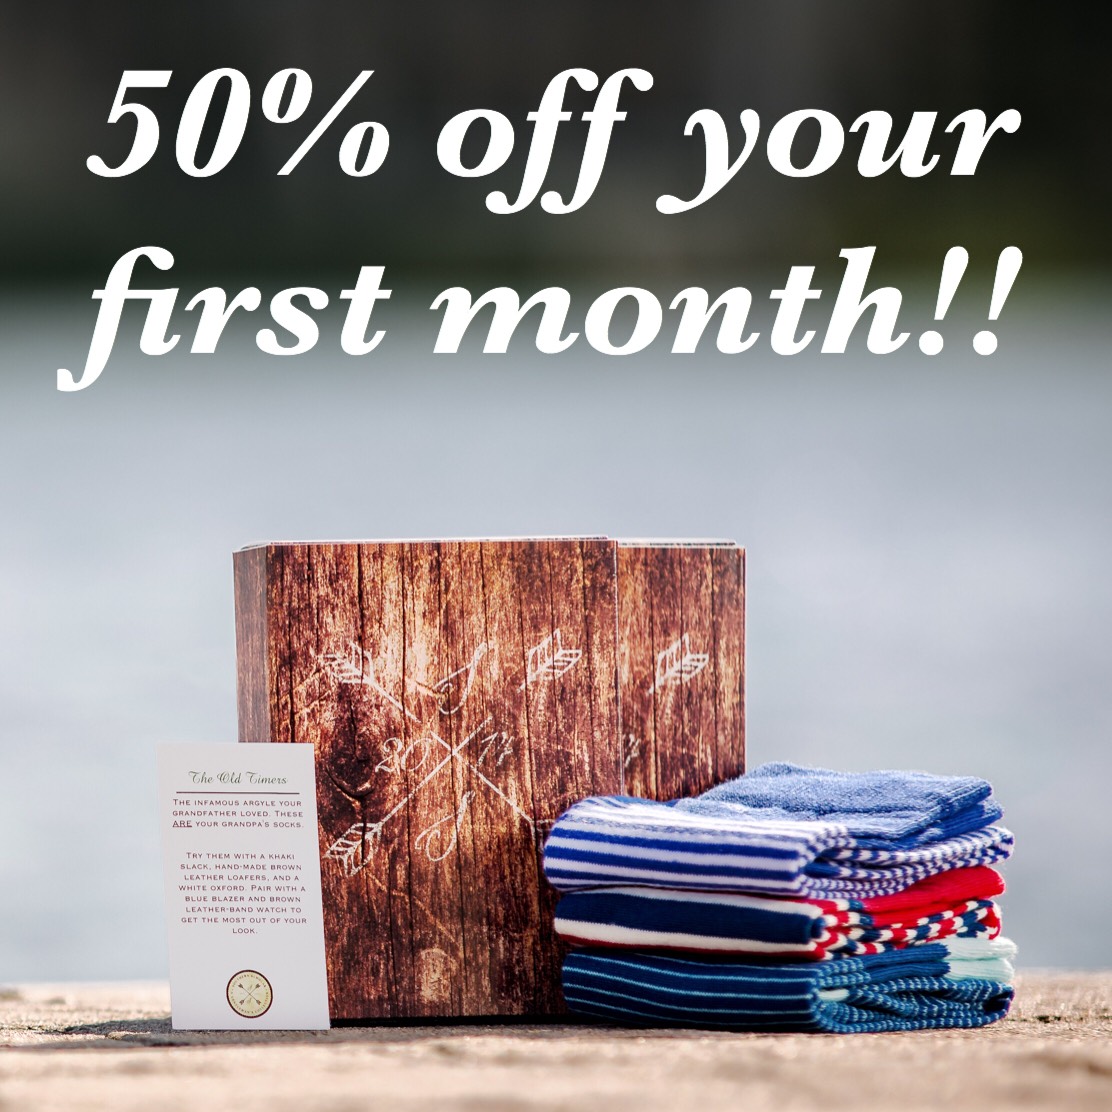 Southern Scholar Black Friday Deal – 50% Off Your First Month!